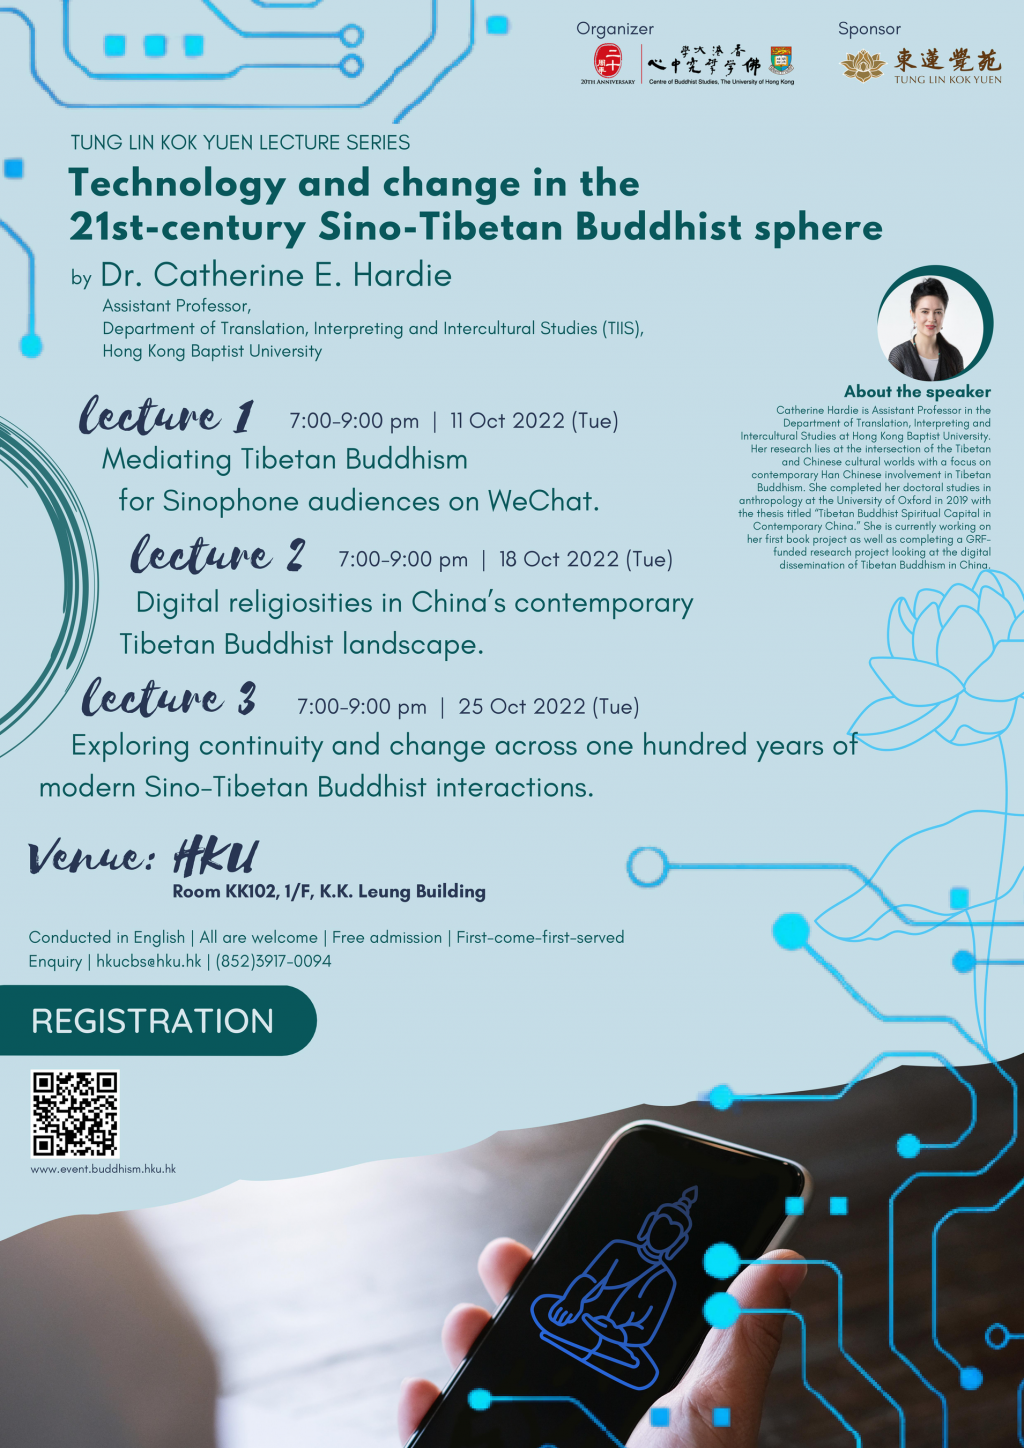 [ Oct 11, 18 & 25] Tung Lin Kok Yuen Lecture Series: Technology and change in the 21st-century Sino-Tibetan Buddhist sphere